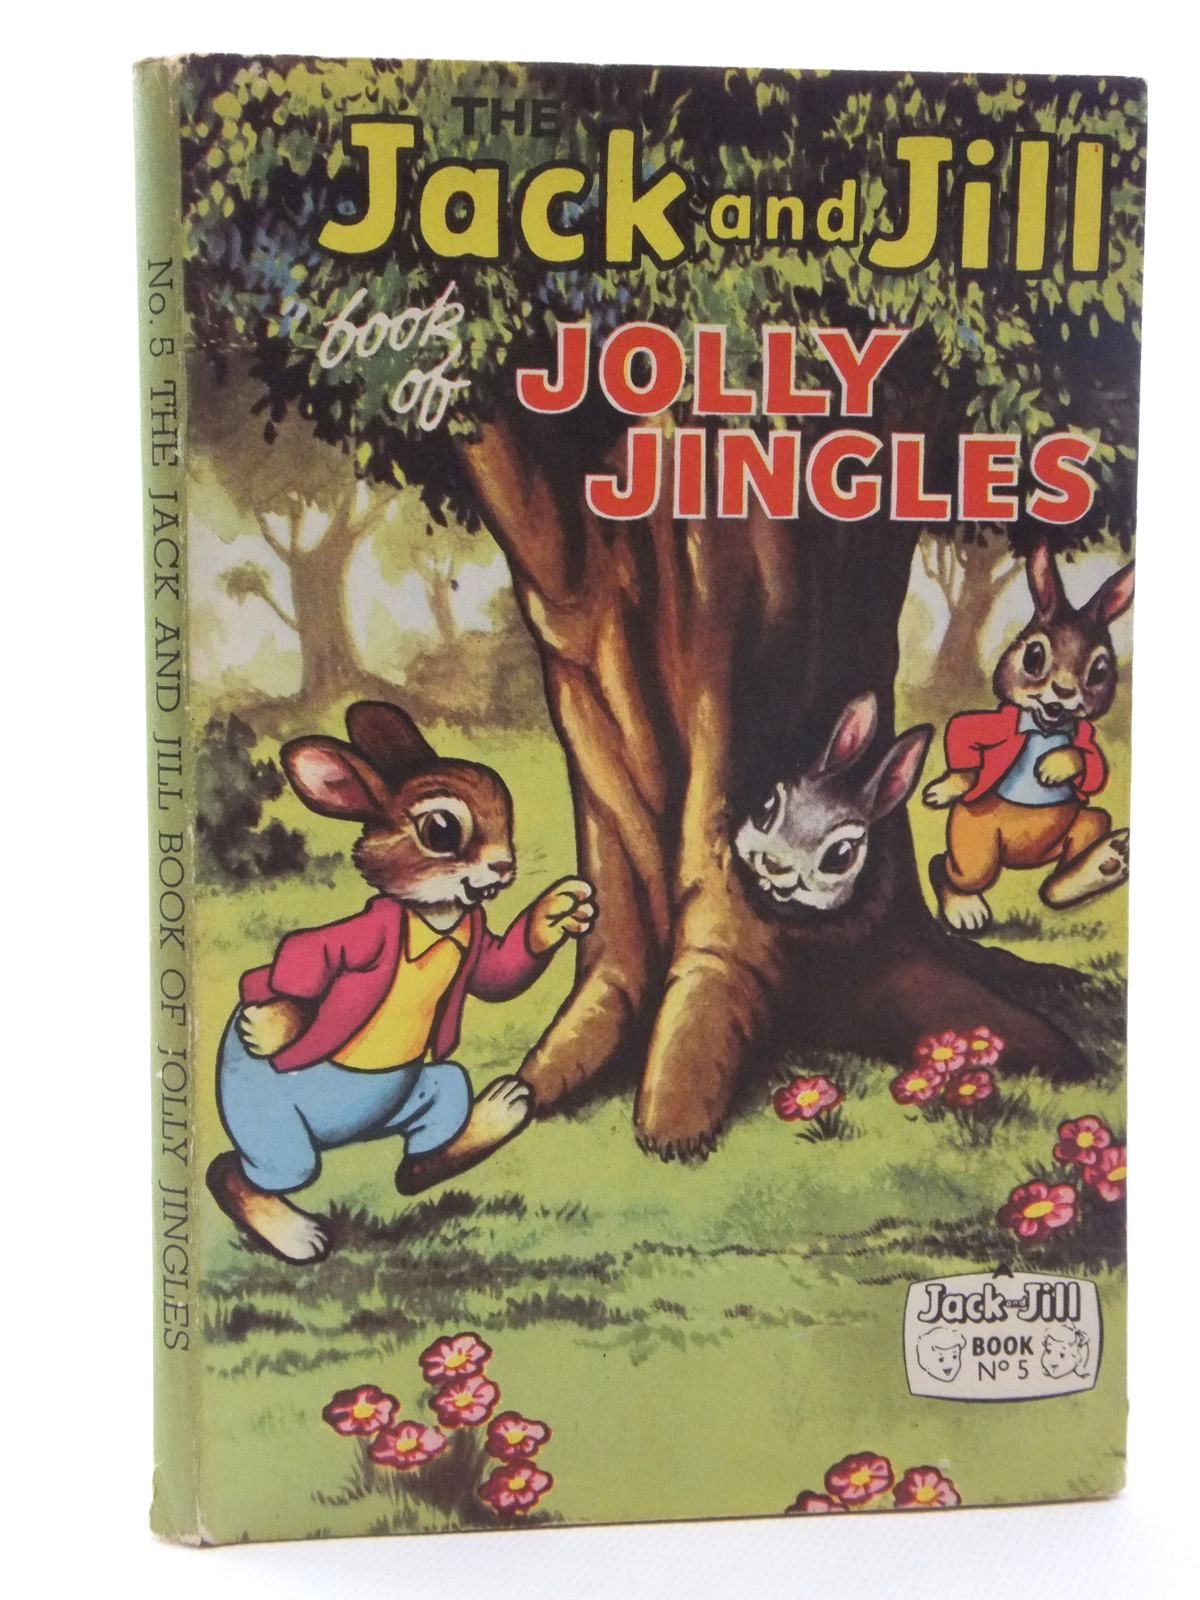 Photo of THE JACK AND JILL BOOK OF JOLLY JINGLES published by Fleetway Publications Ltd. (STOCK CODE: 1317113)  for sale by Stella & Rose's Books